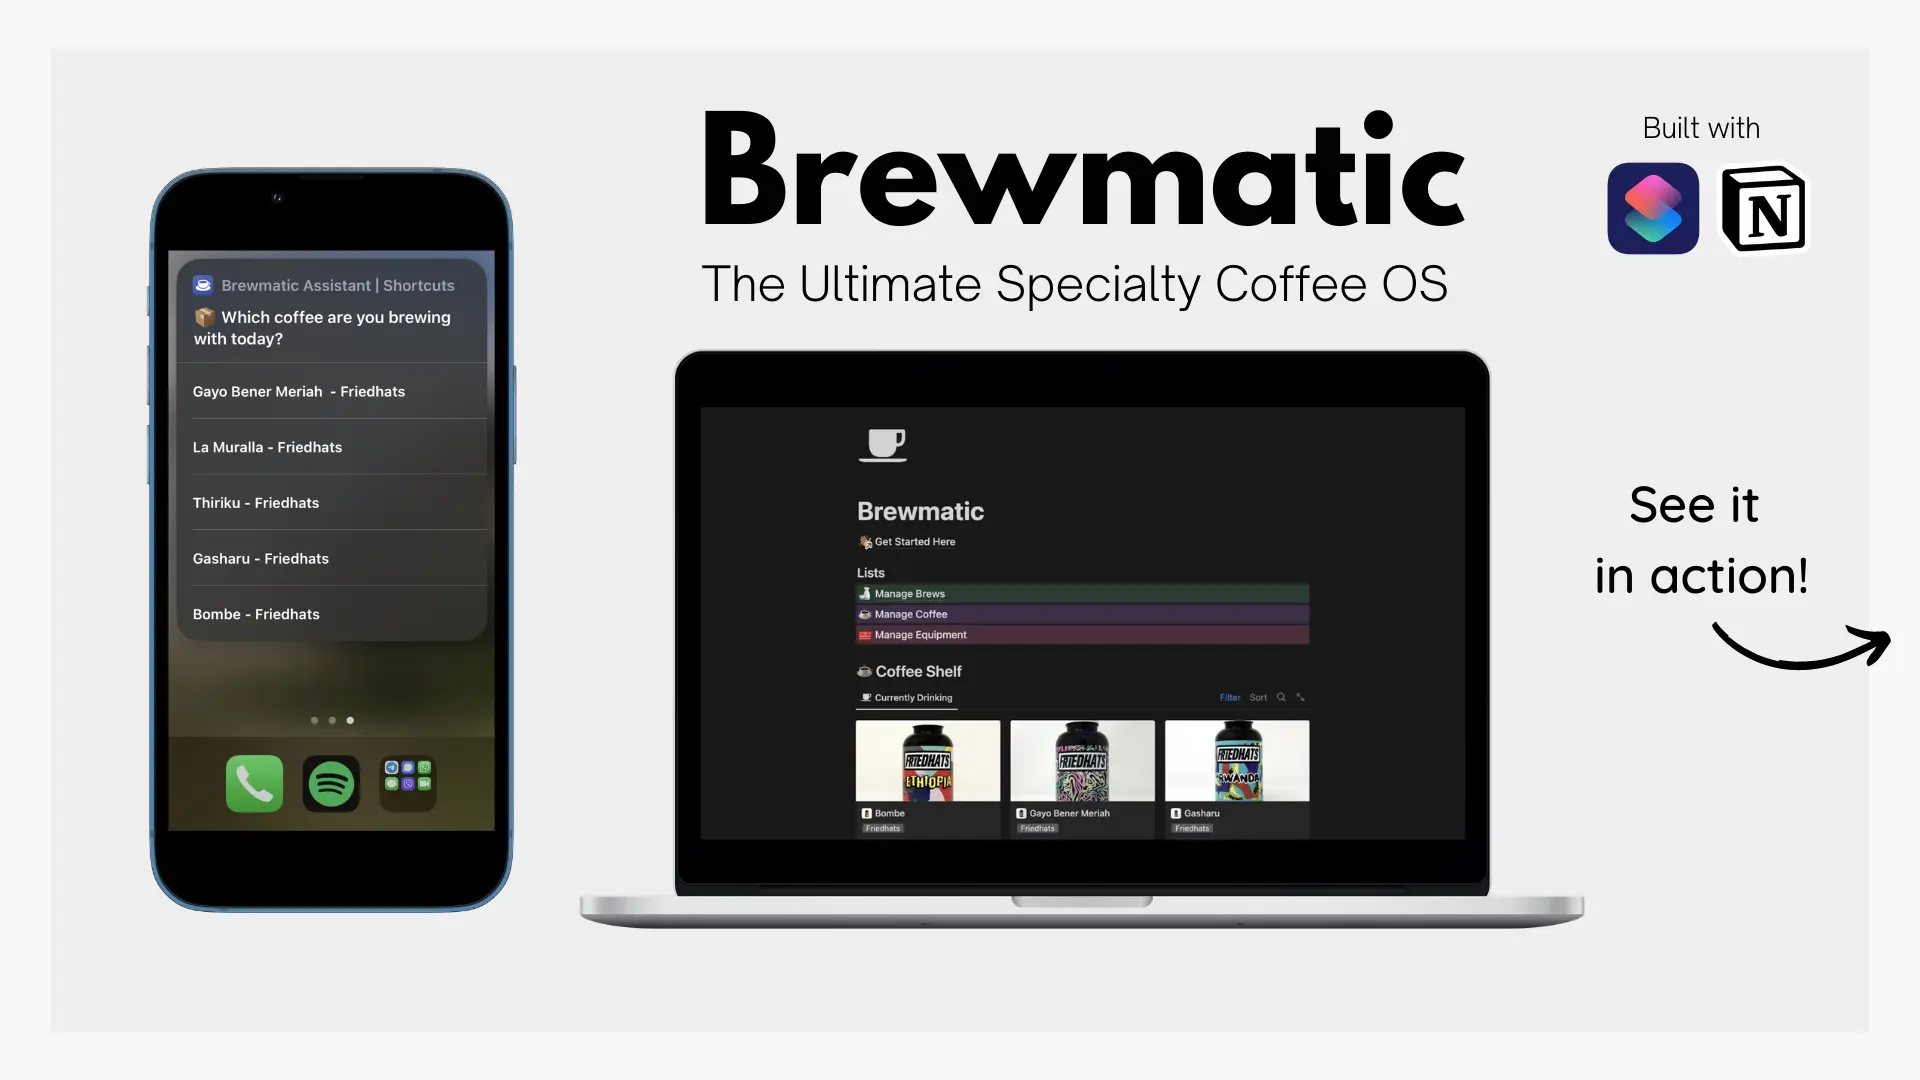 Brewmatic - The Ultimate Specialty Coffee OS image